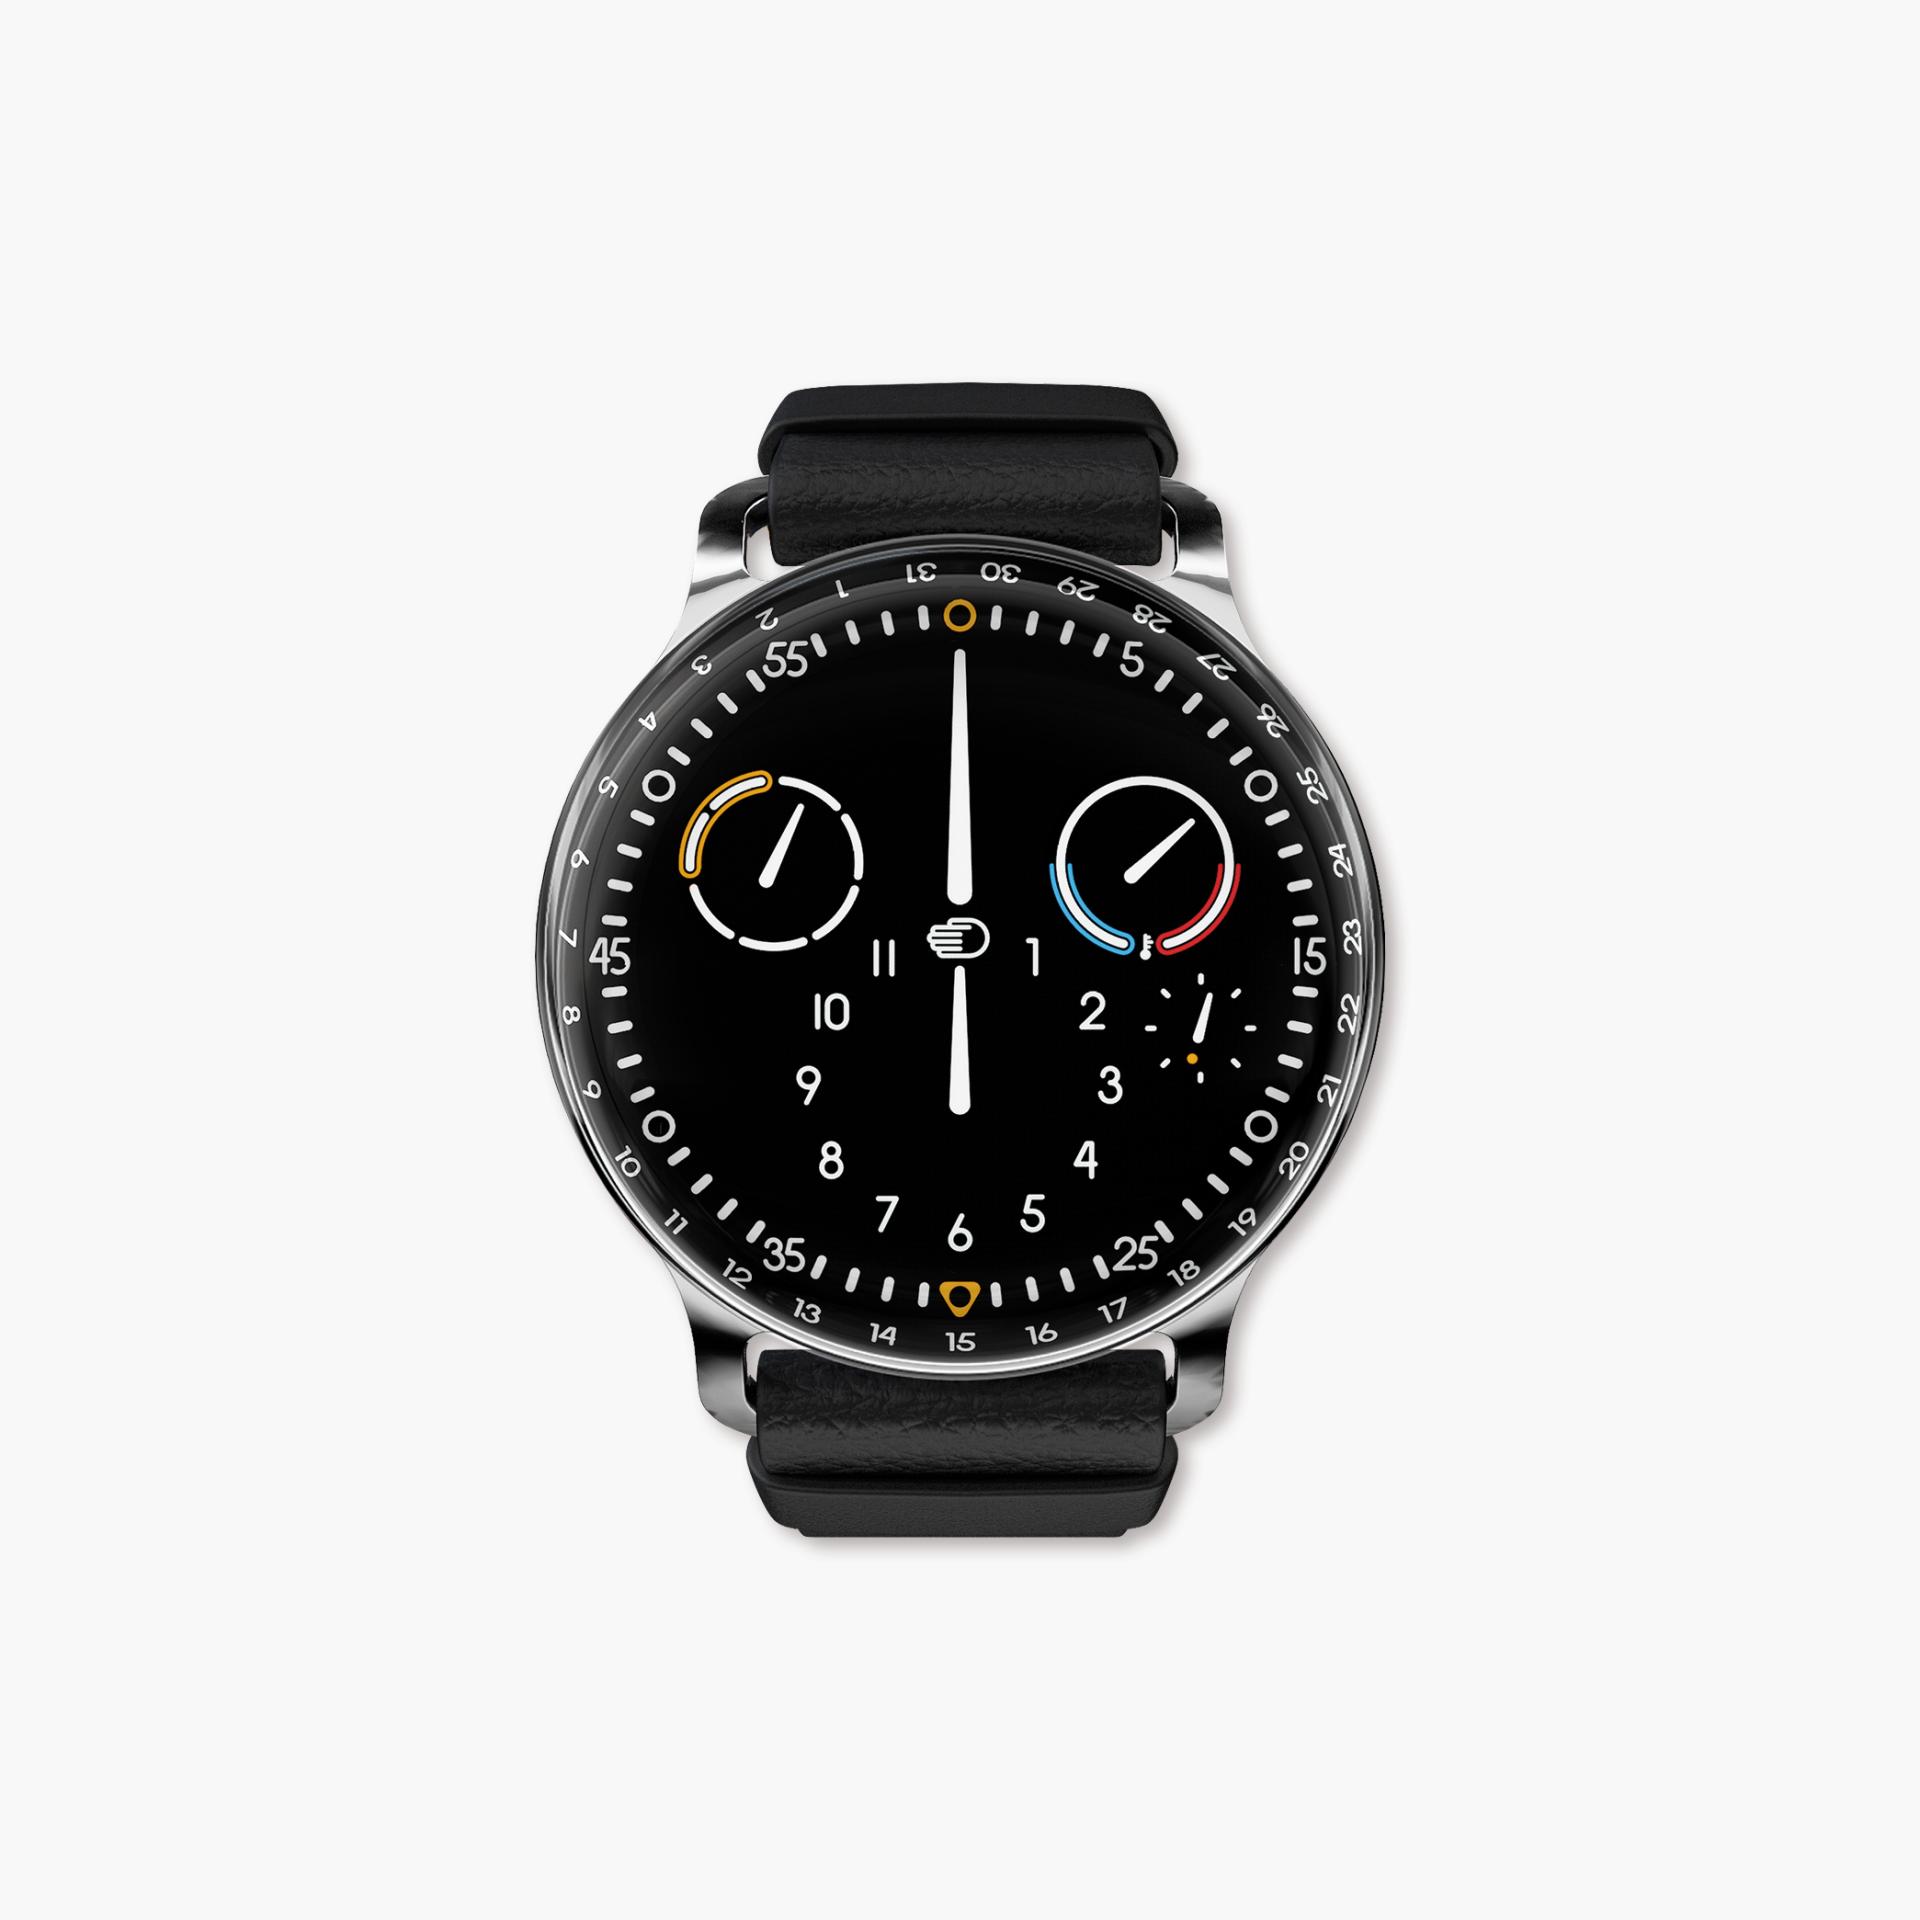 Type 3 Black made by Ressence